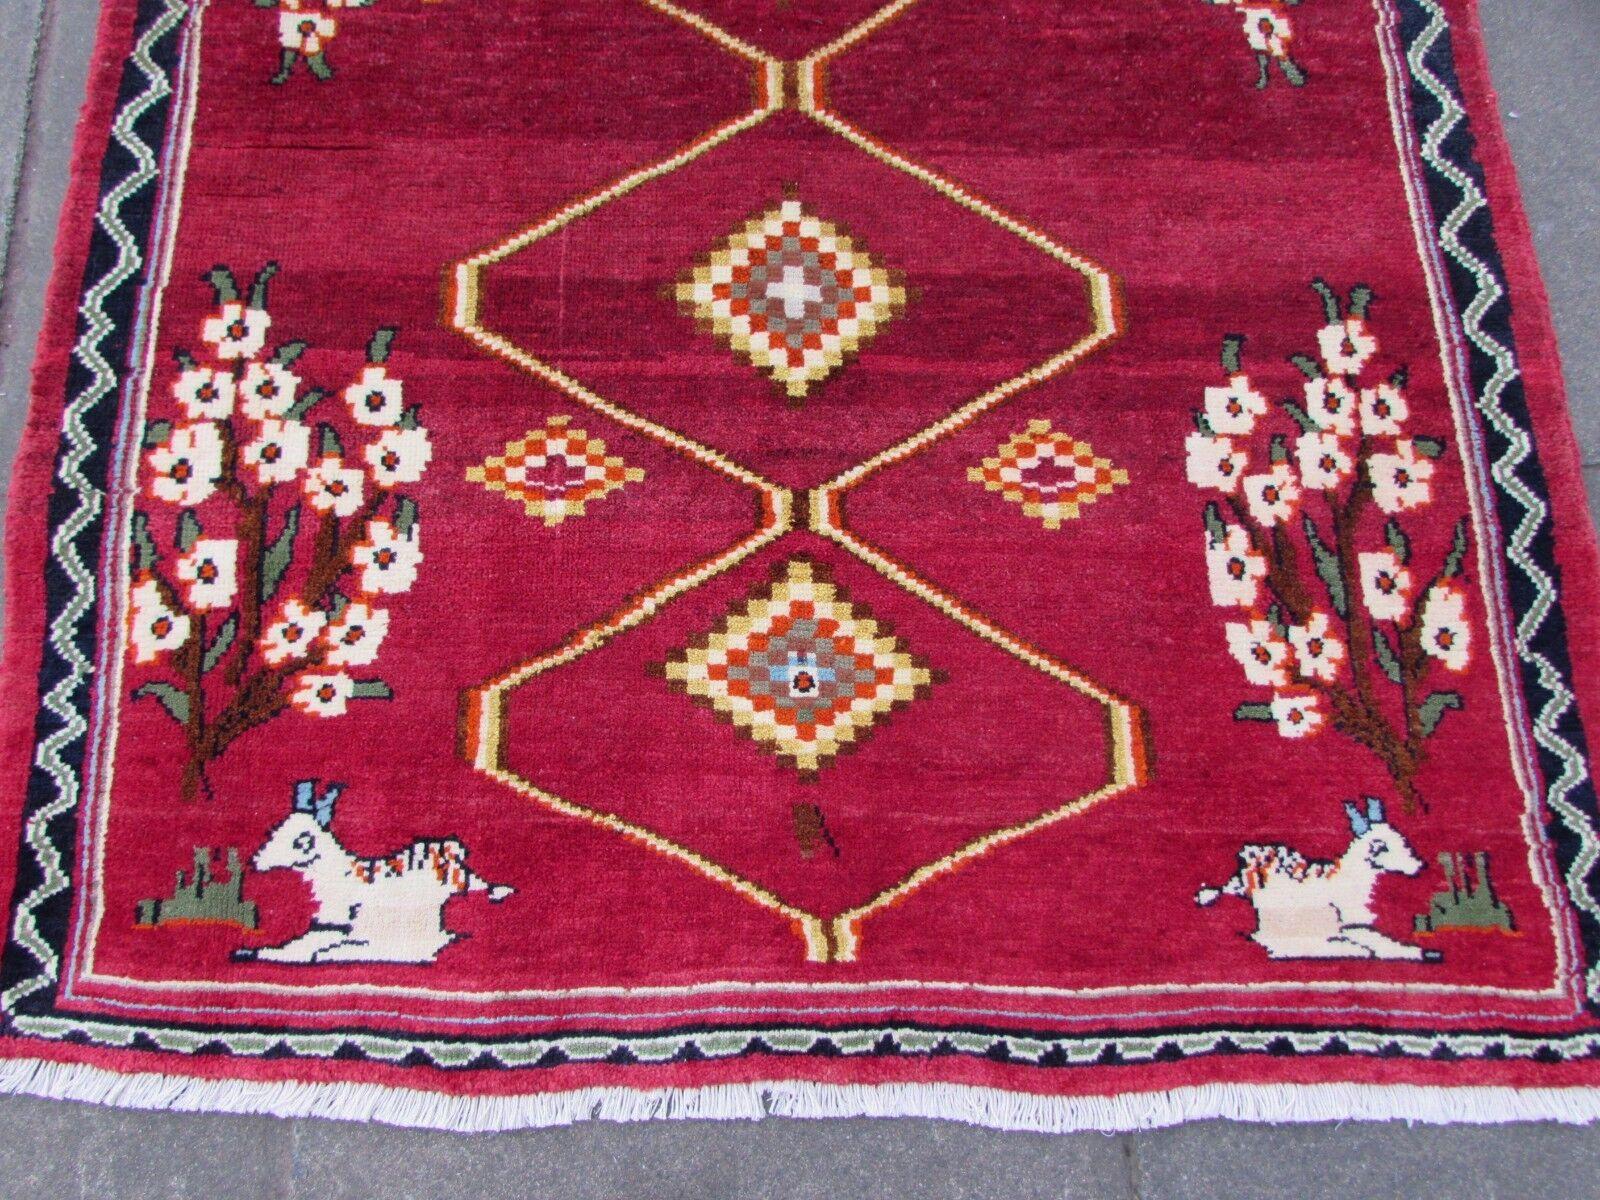 French Handmade Vintage Persian Style Gabbeh Red Rug 4.1' x 5.3', 1970s, 1Q60 For Sale